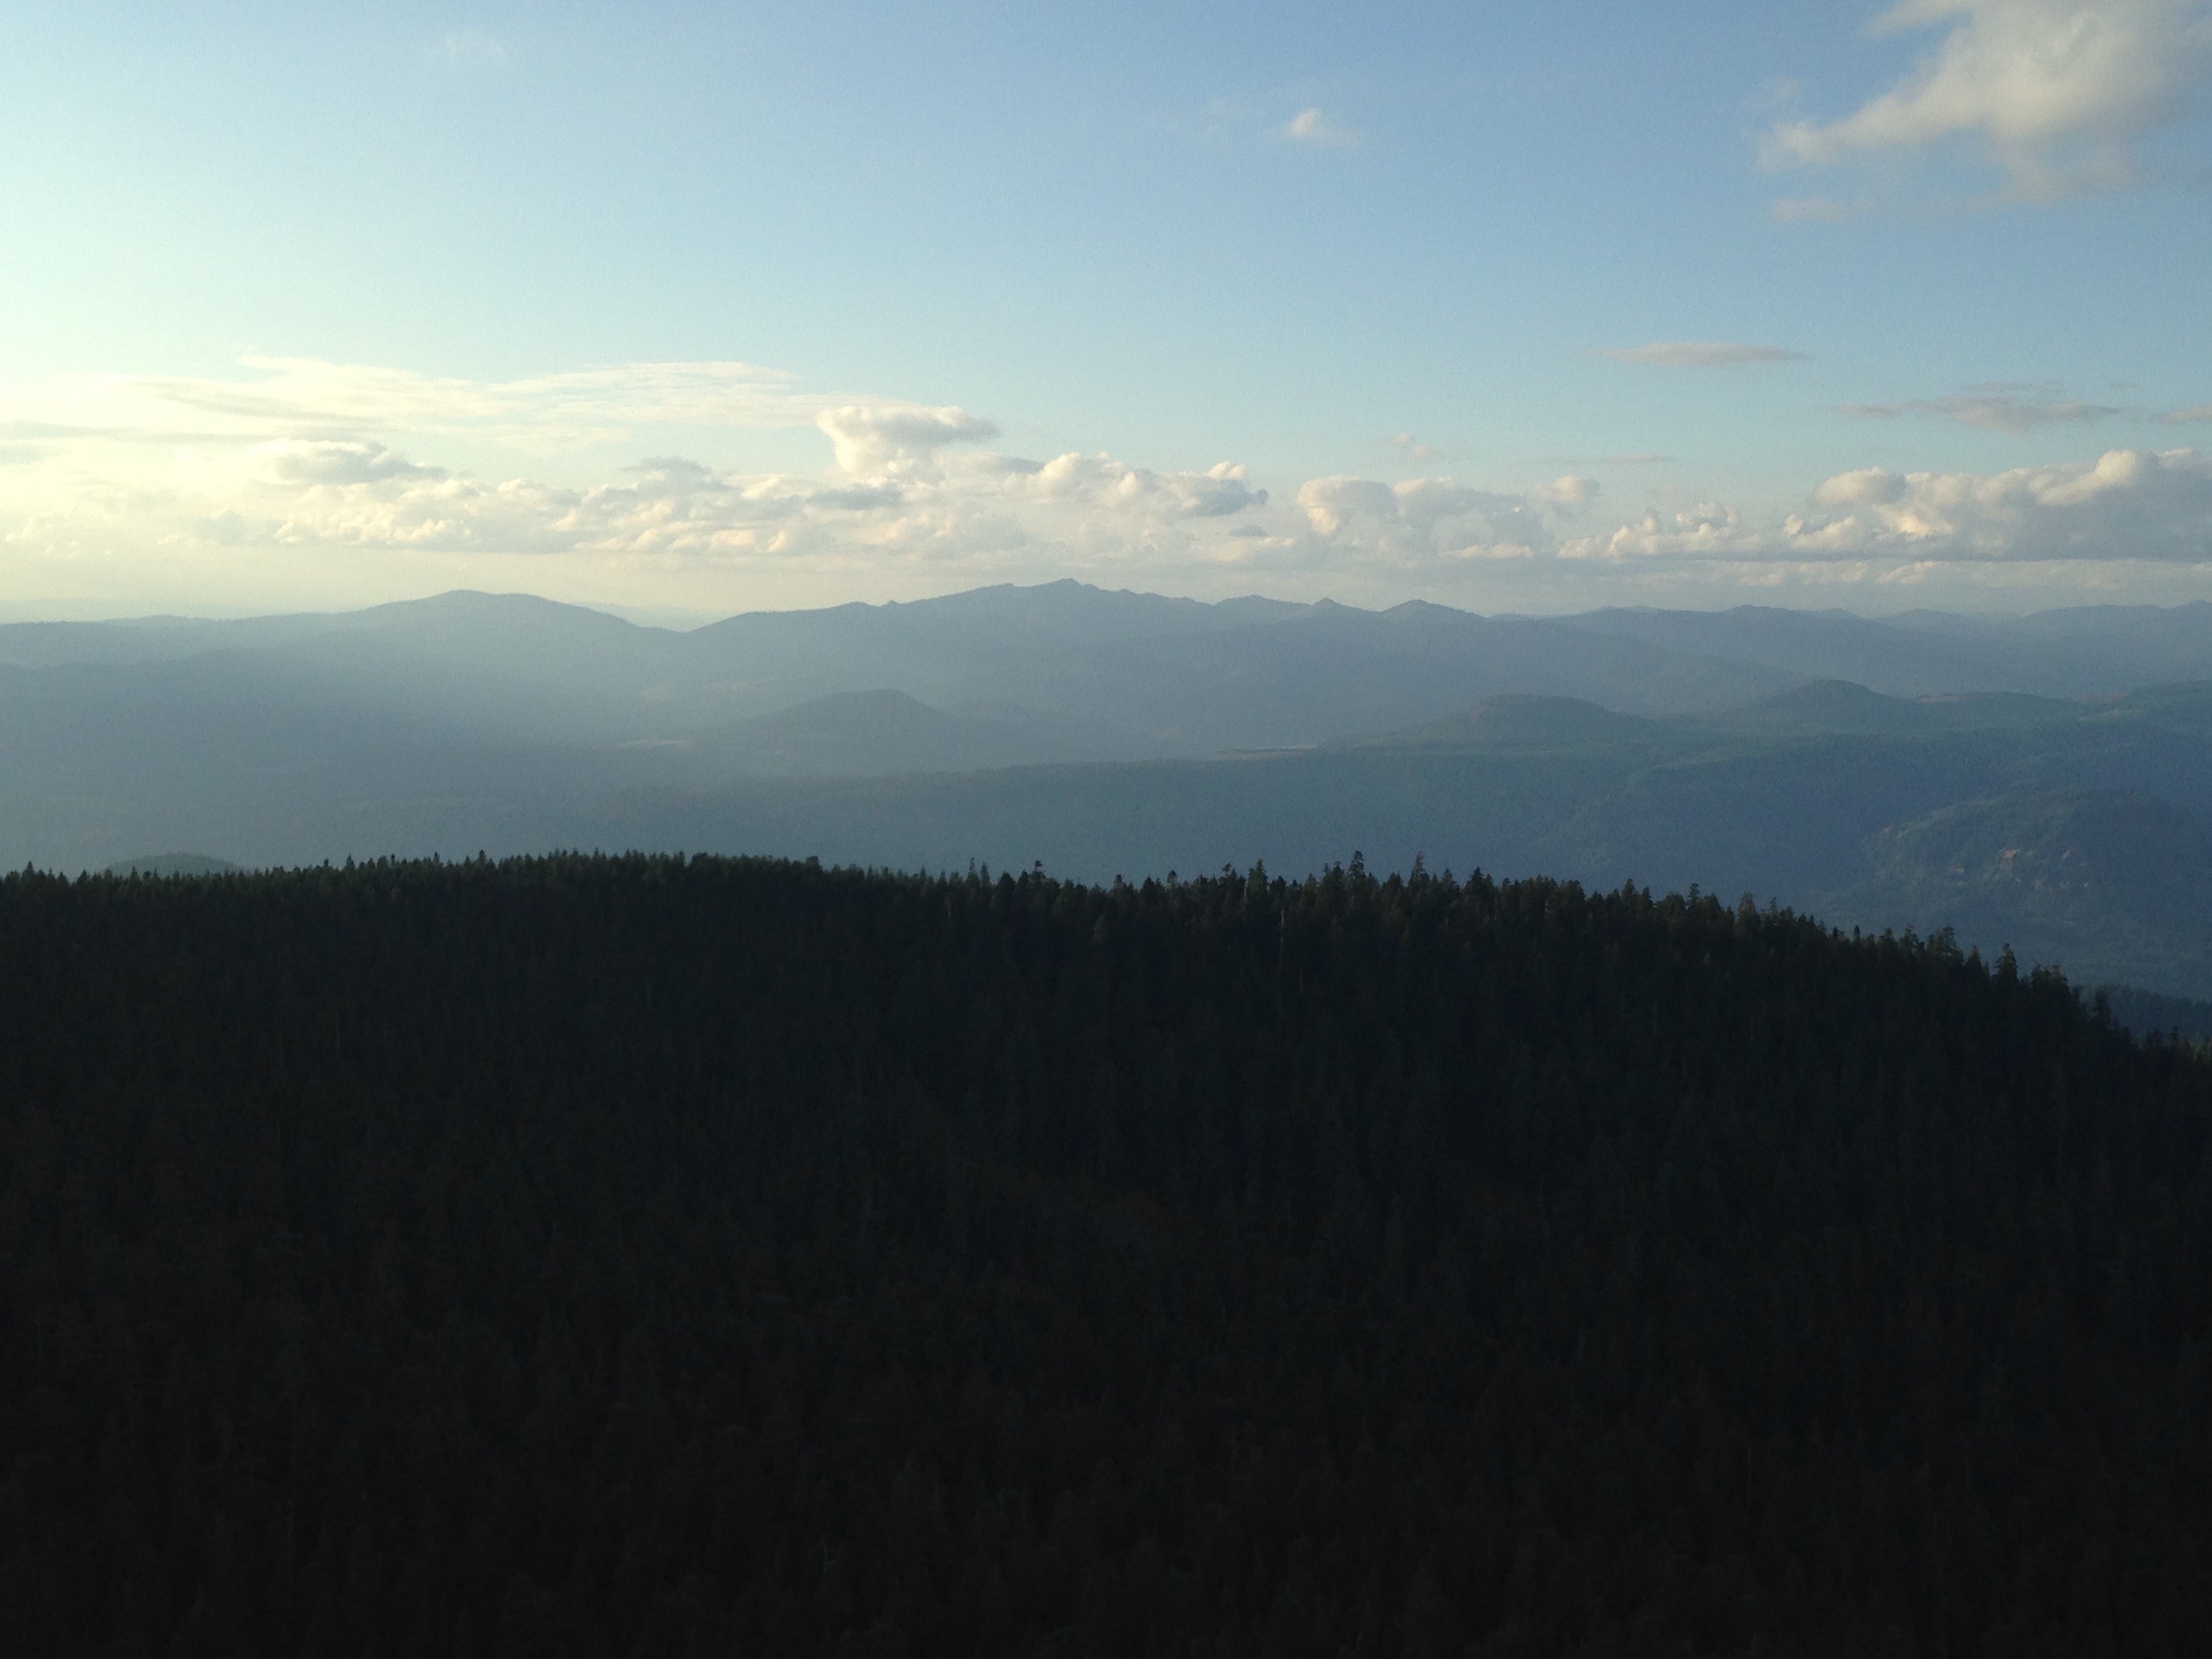 Camper submitted image from Larch Mountain - 2